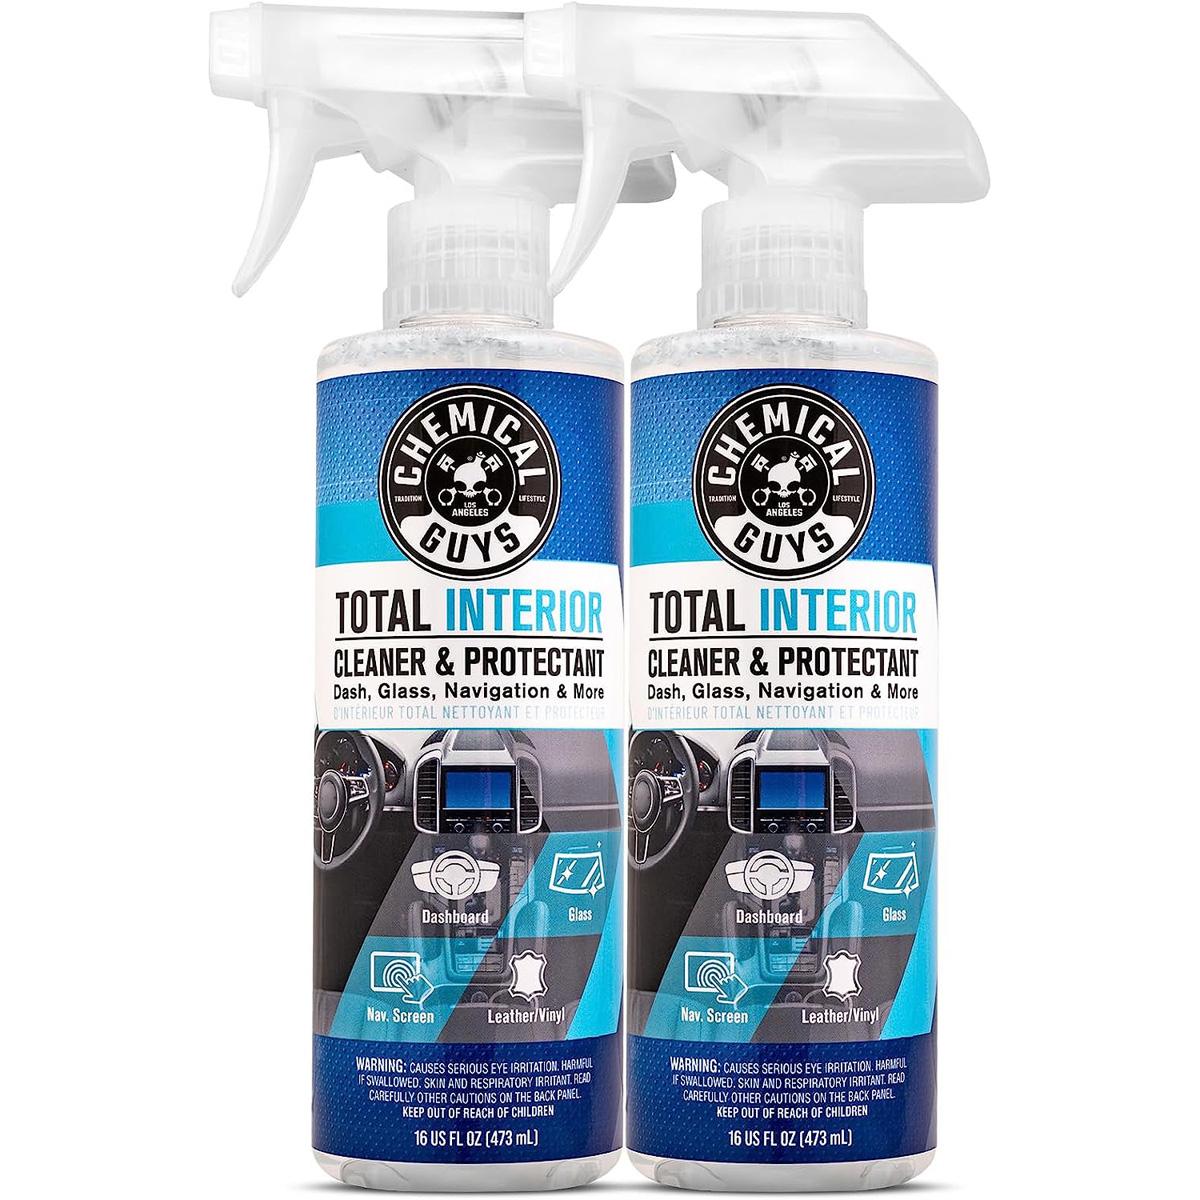 Chemical Guys SPI2201602 Total Interior Cleaner and Protectant 2 Pack for $14.99